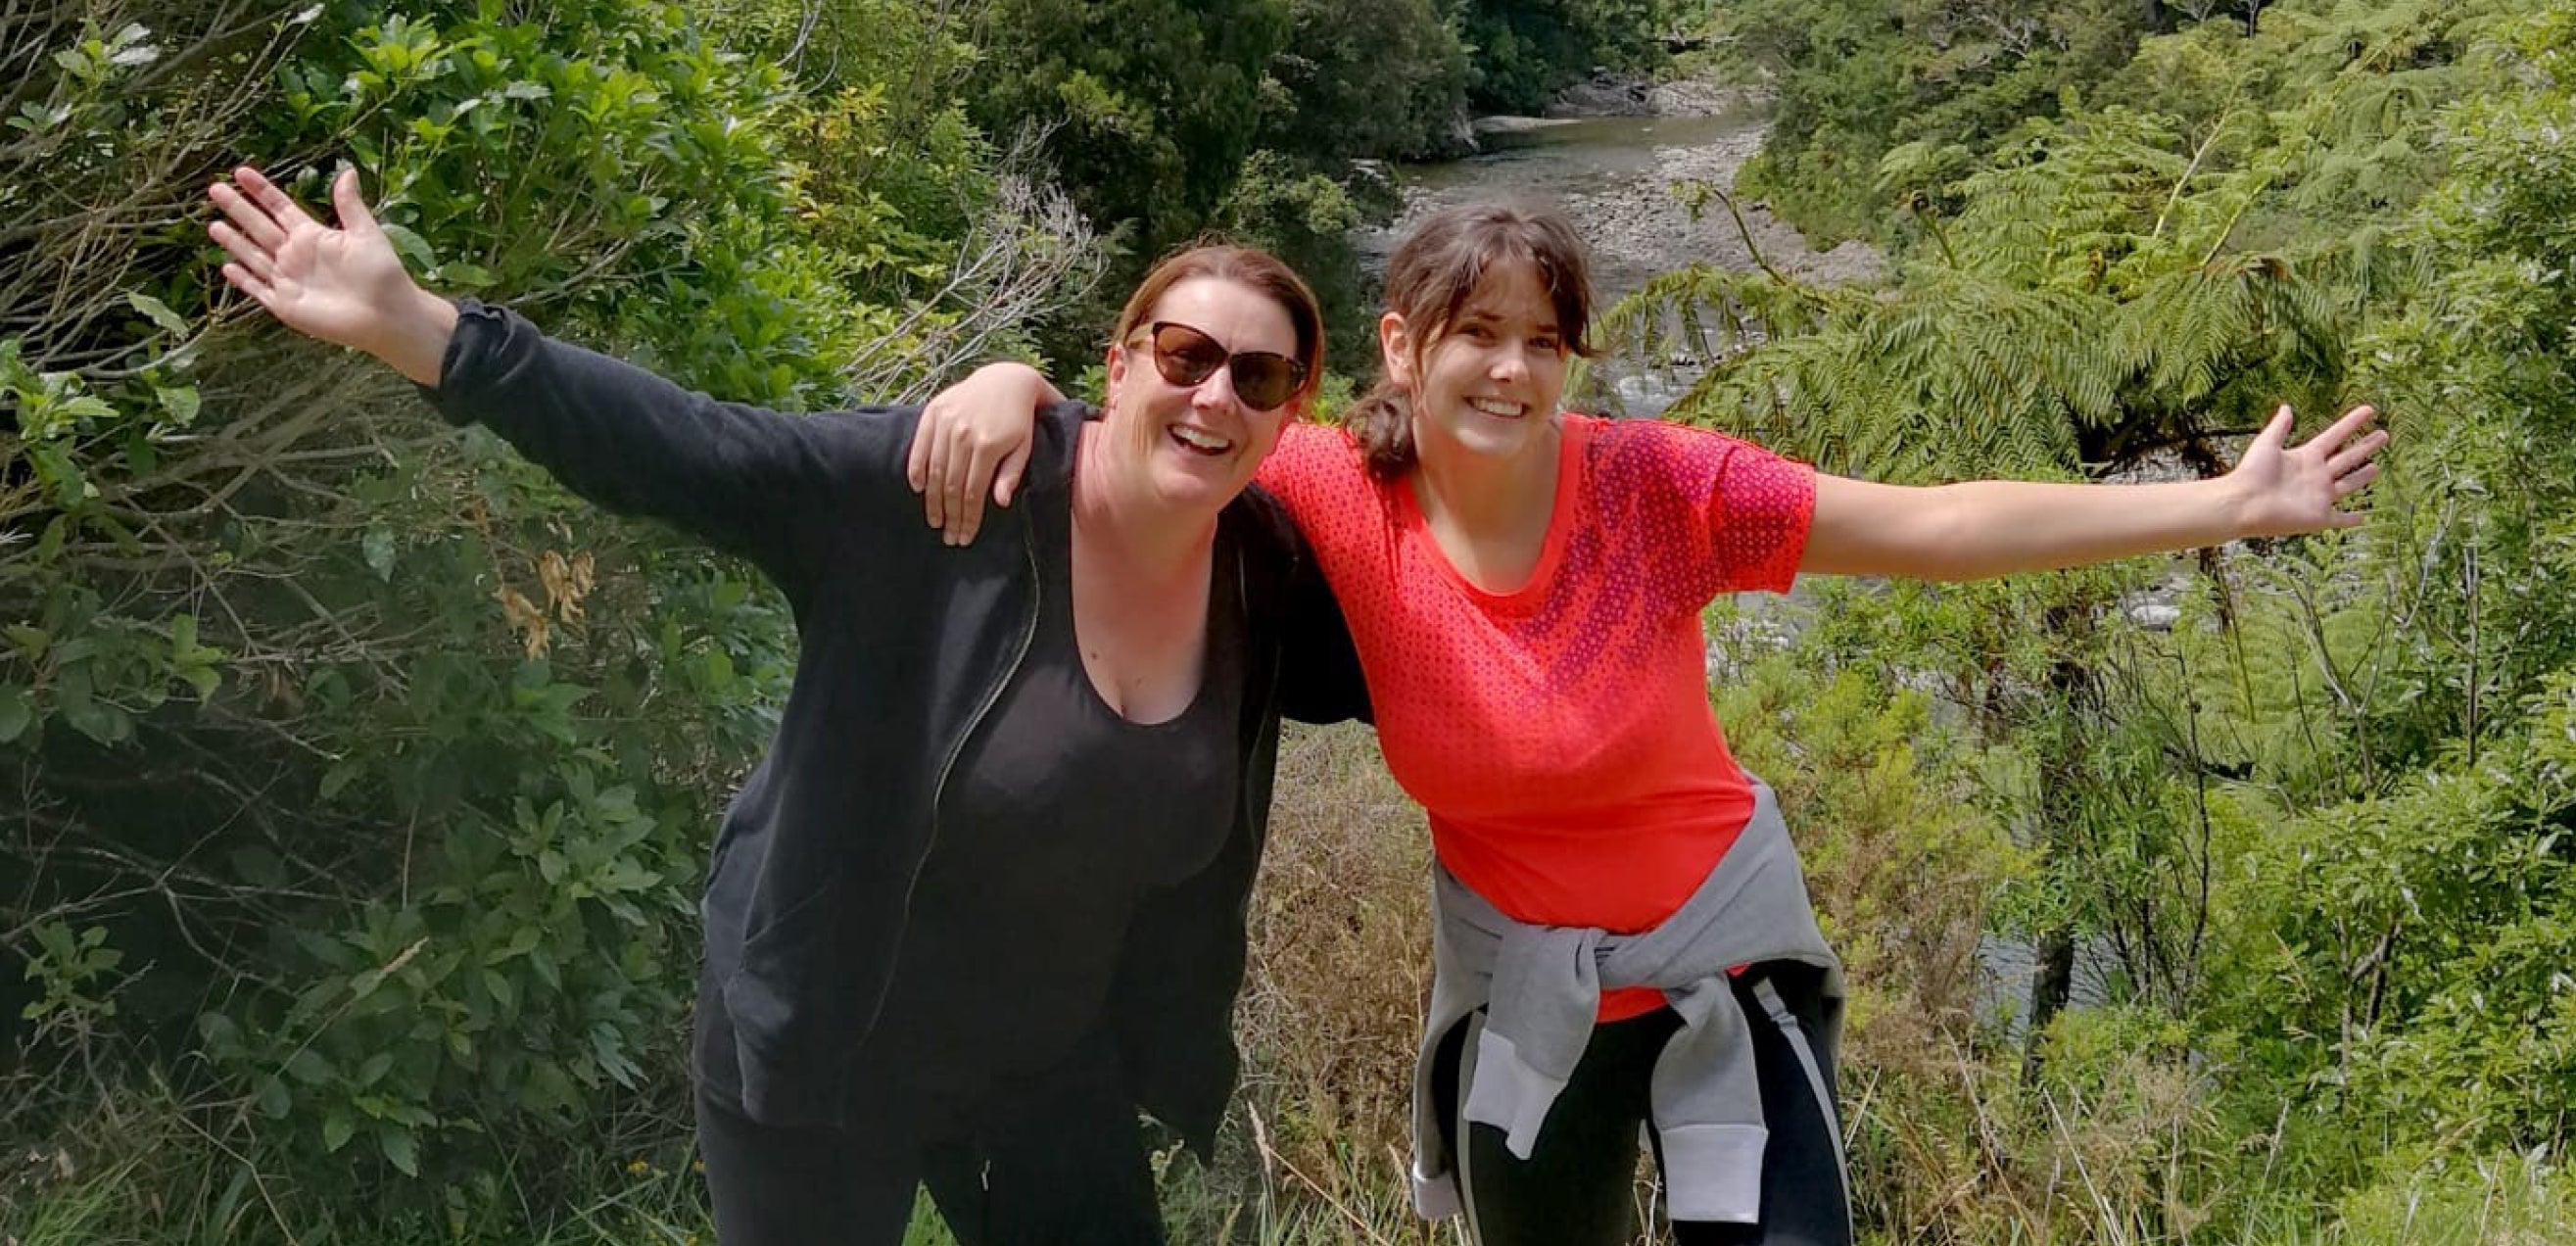 My mum, Lisa, and I on our annual birthday bushwalk, something I once thought I would never be able to do.